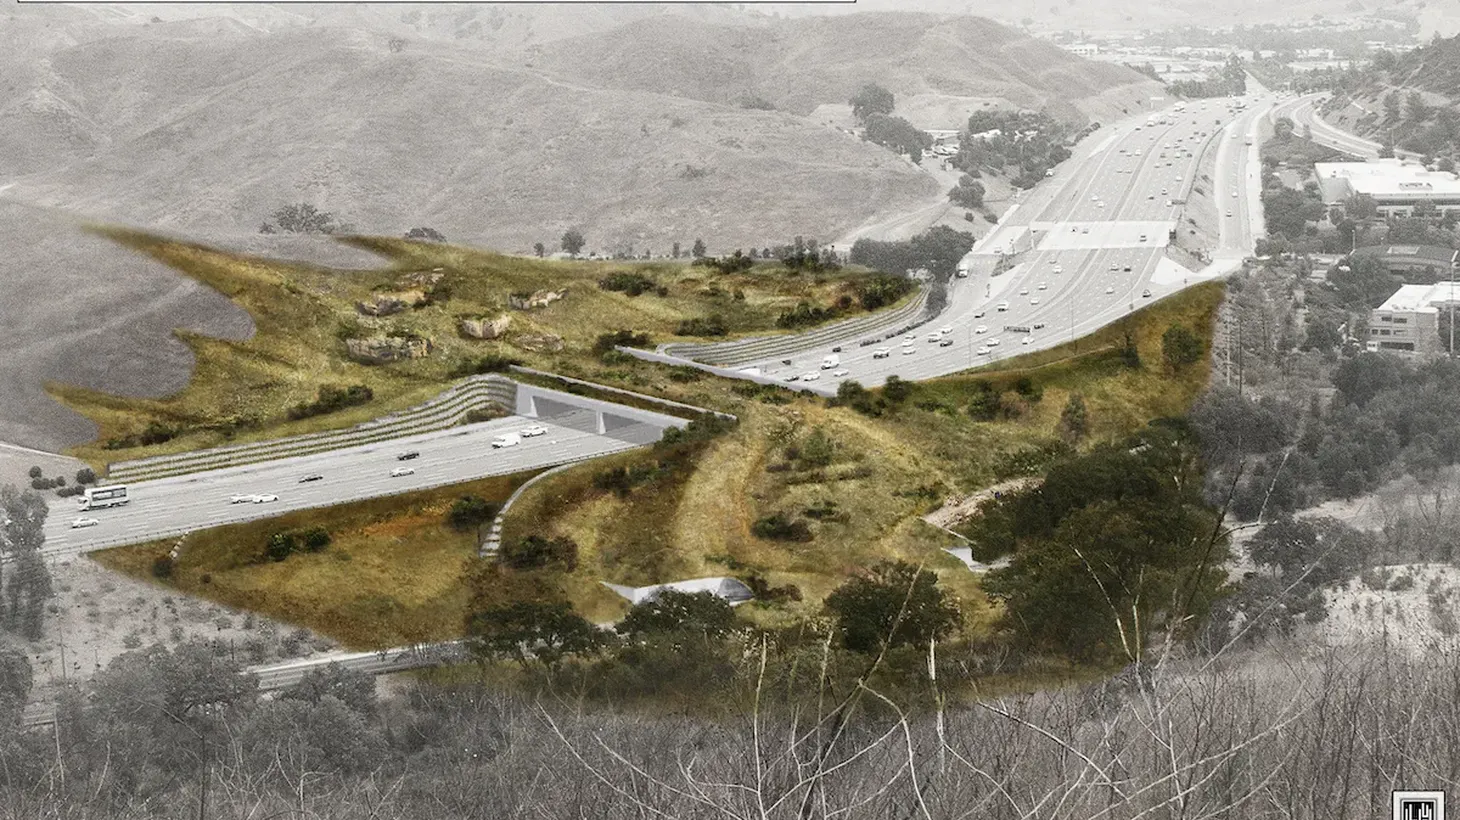 “This is being designed for everything from monarch butterflies to mountain lions. It really is a whole-scale solution to reconnecting that Santa Monica Mountains ecosystem to the rest of the world,” says Beth Pratt-Bergstrom, California director for the National Wildlife Federation.